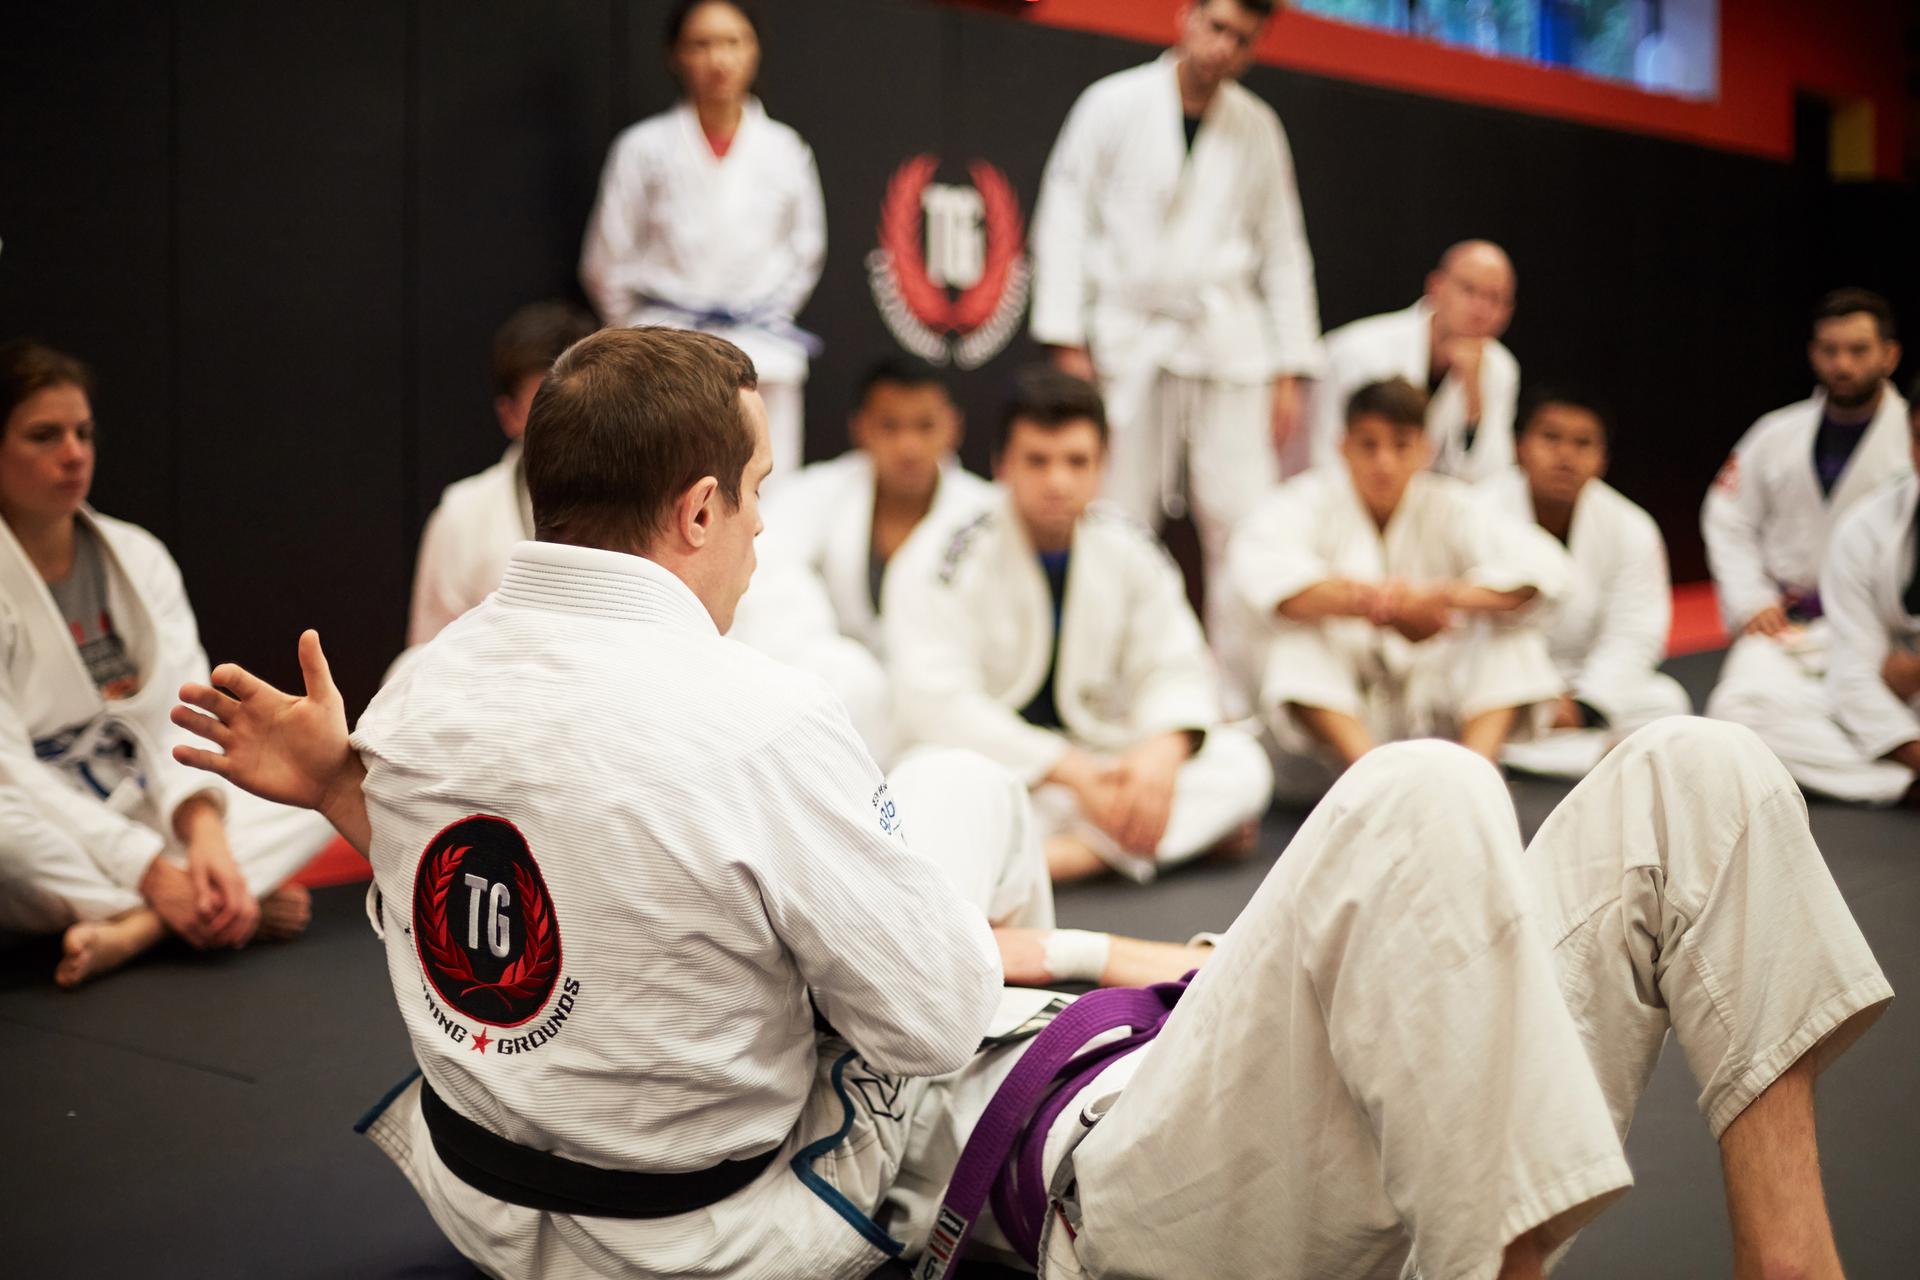 A view inside a martial arts school in bergen county where an instructor is teaching his student how to perform an armbar